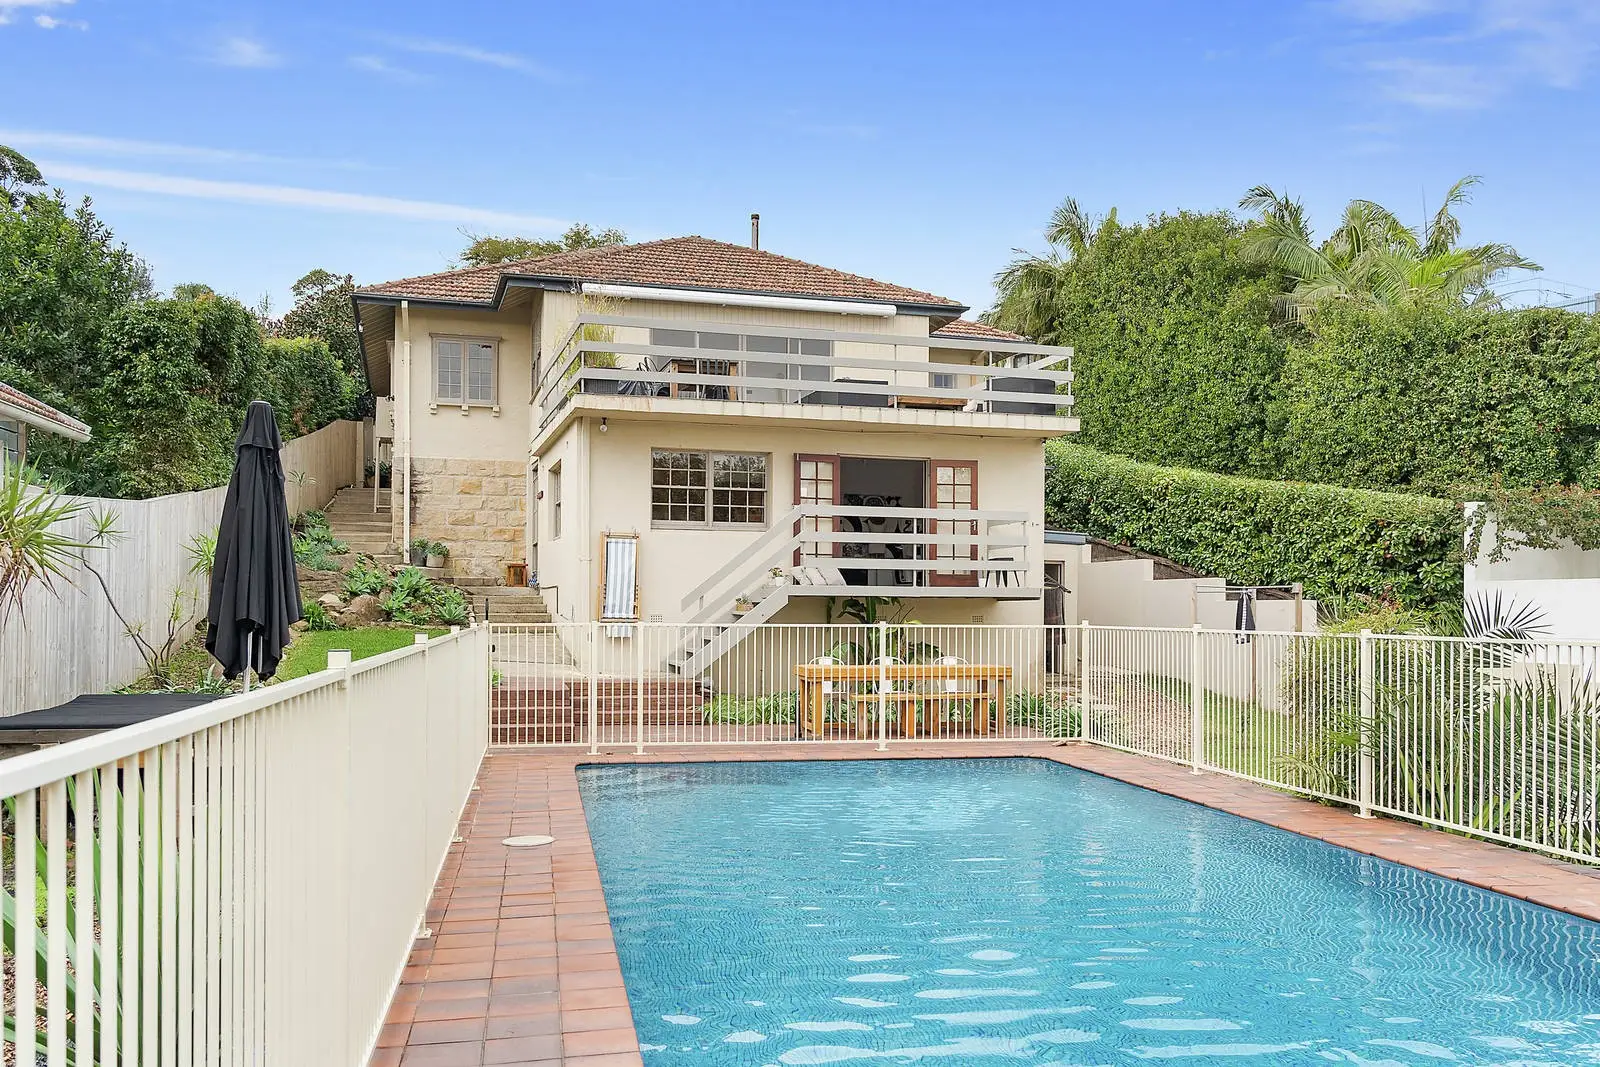 Photo #2: 12 The Crescent, Vaucluse - Sold by Sydney Sotheby's International Realty